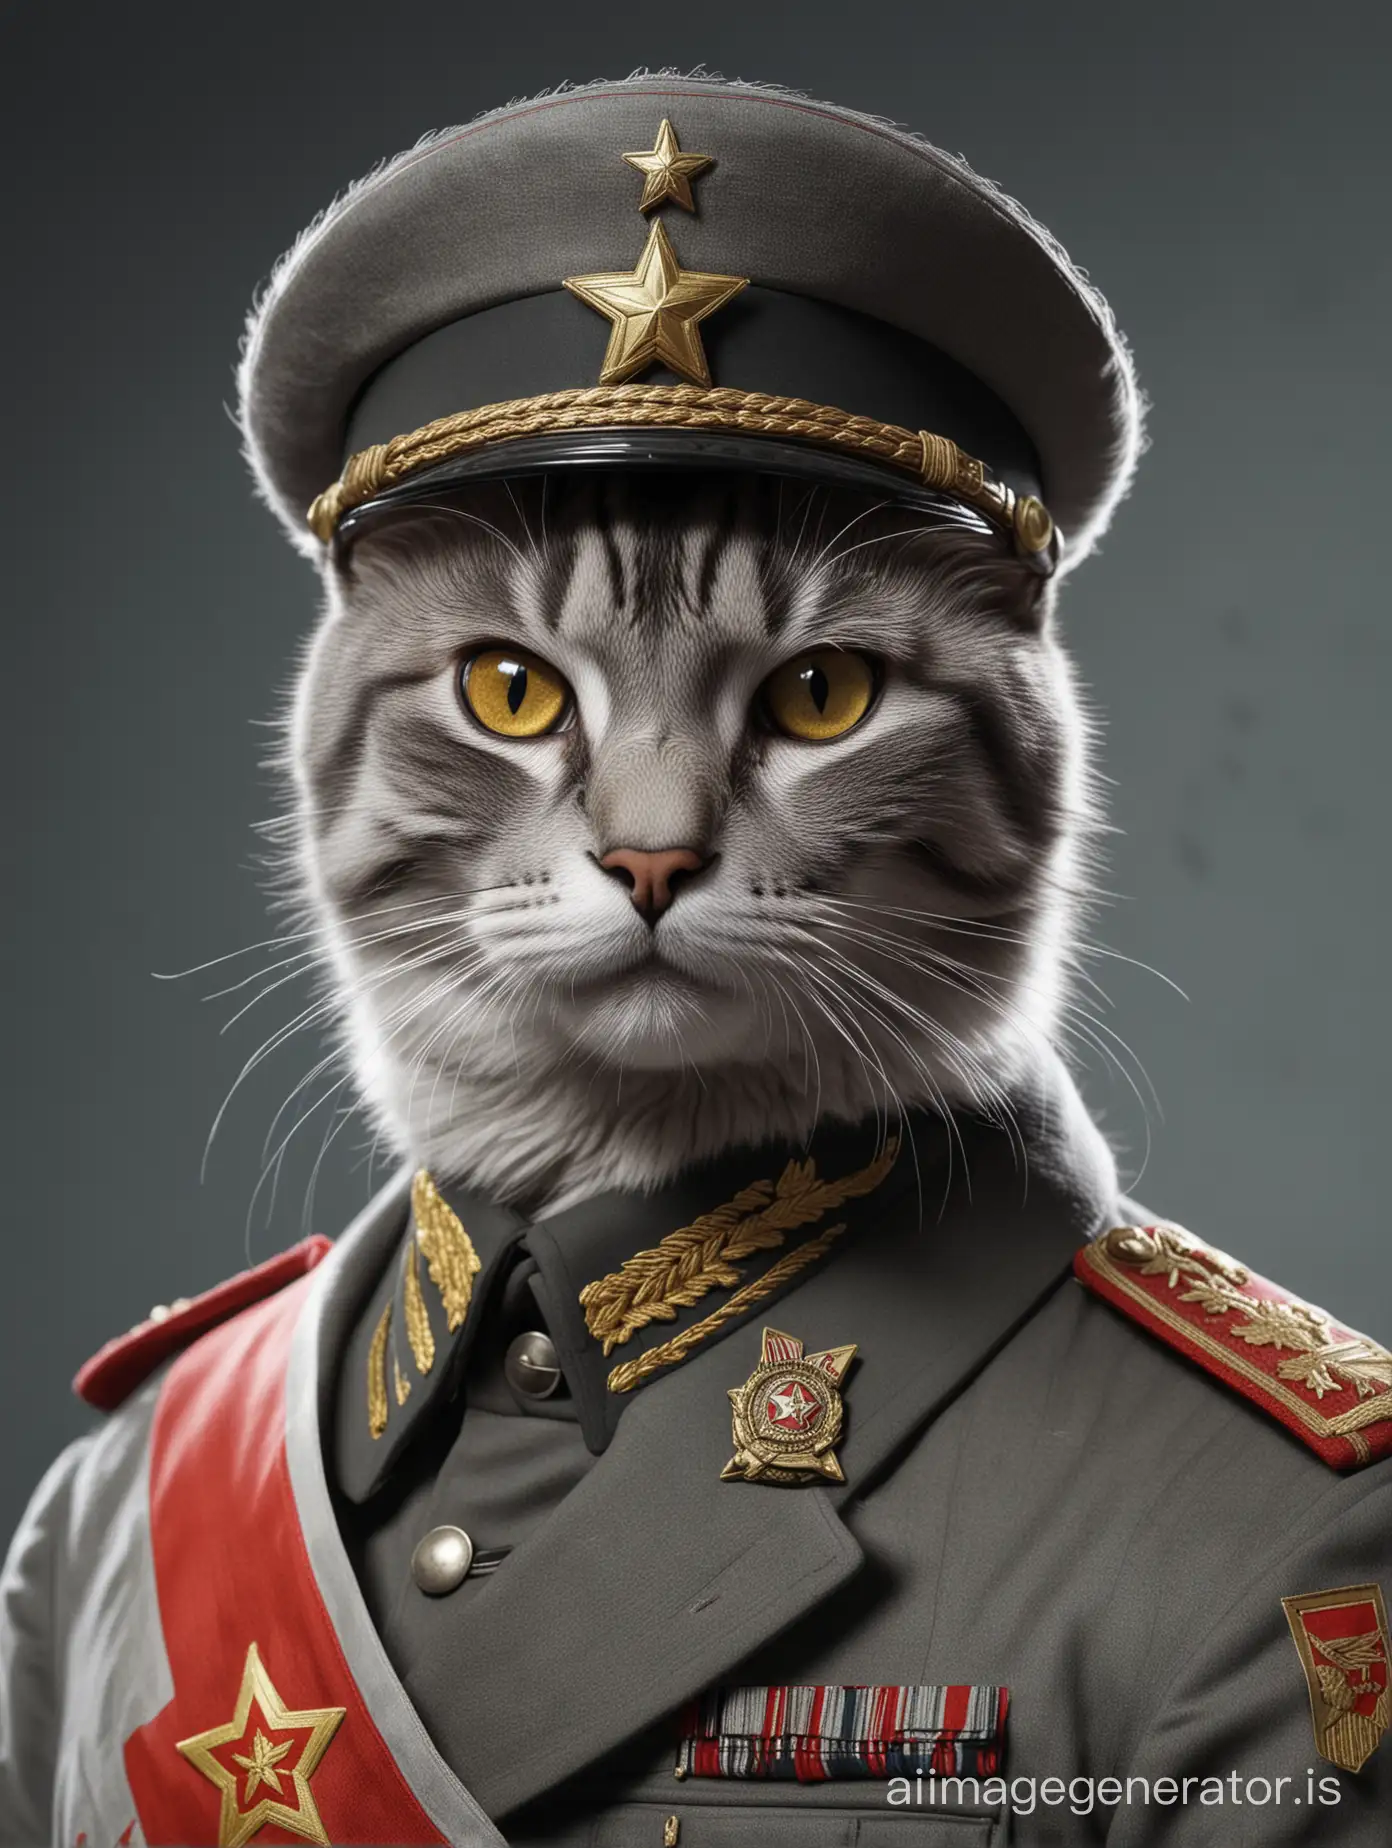 4k, ultra resolution, hd, realistic. Soviet officer 1940 style light grey cat with grey eyes with Soviet flag in hand